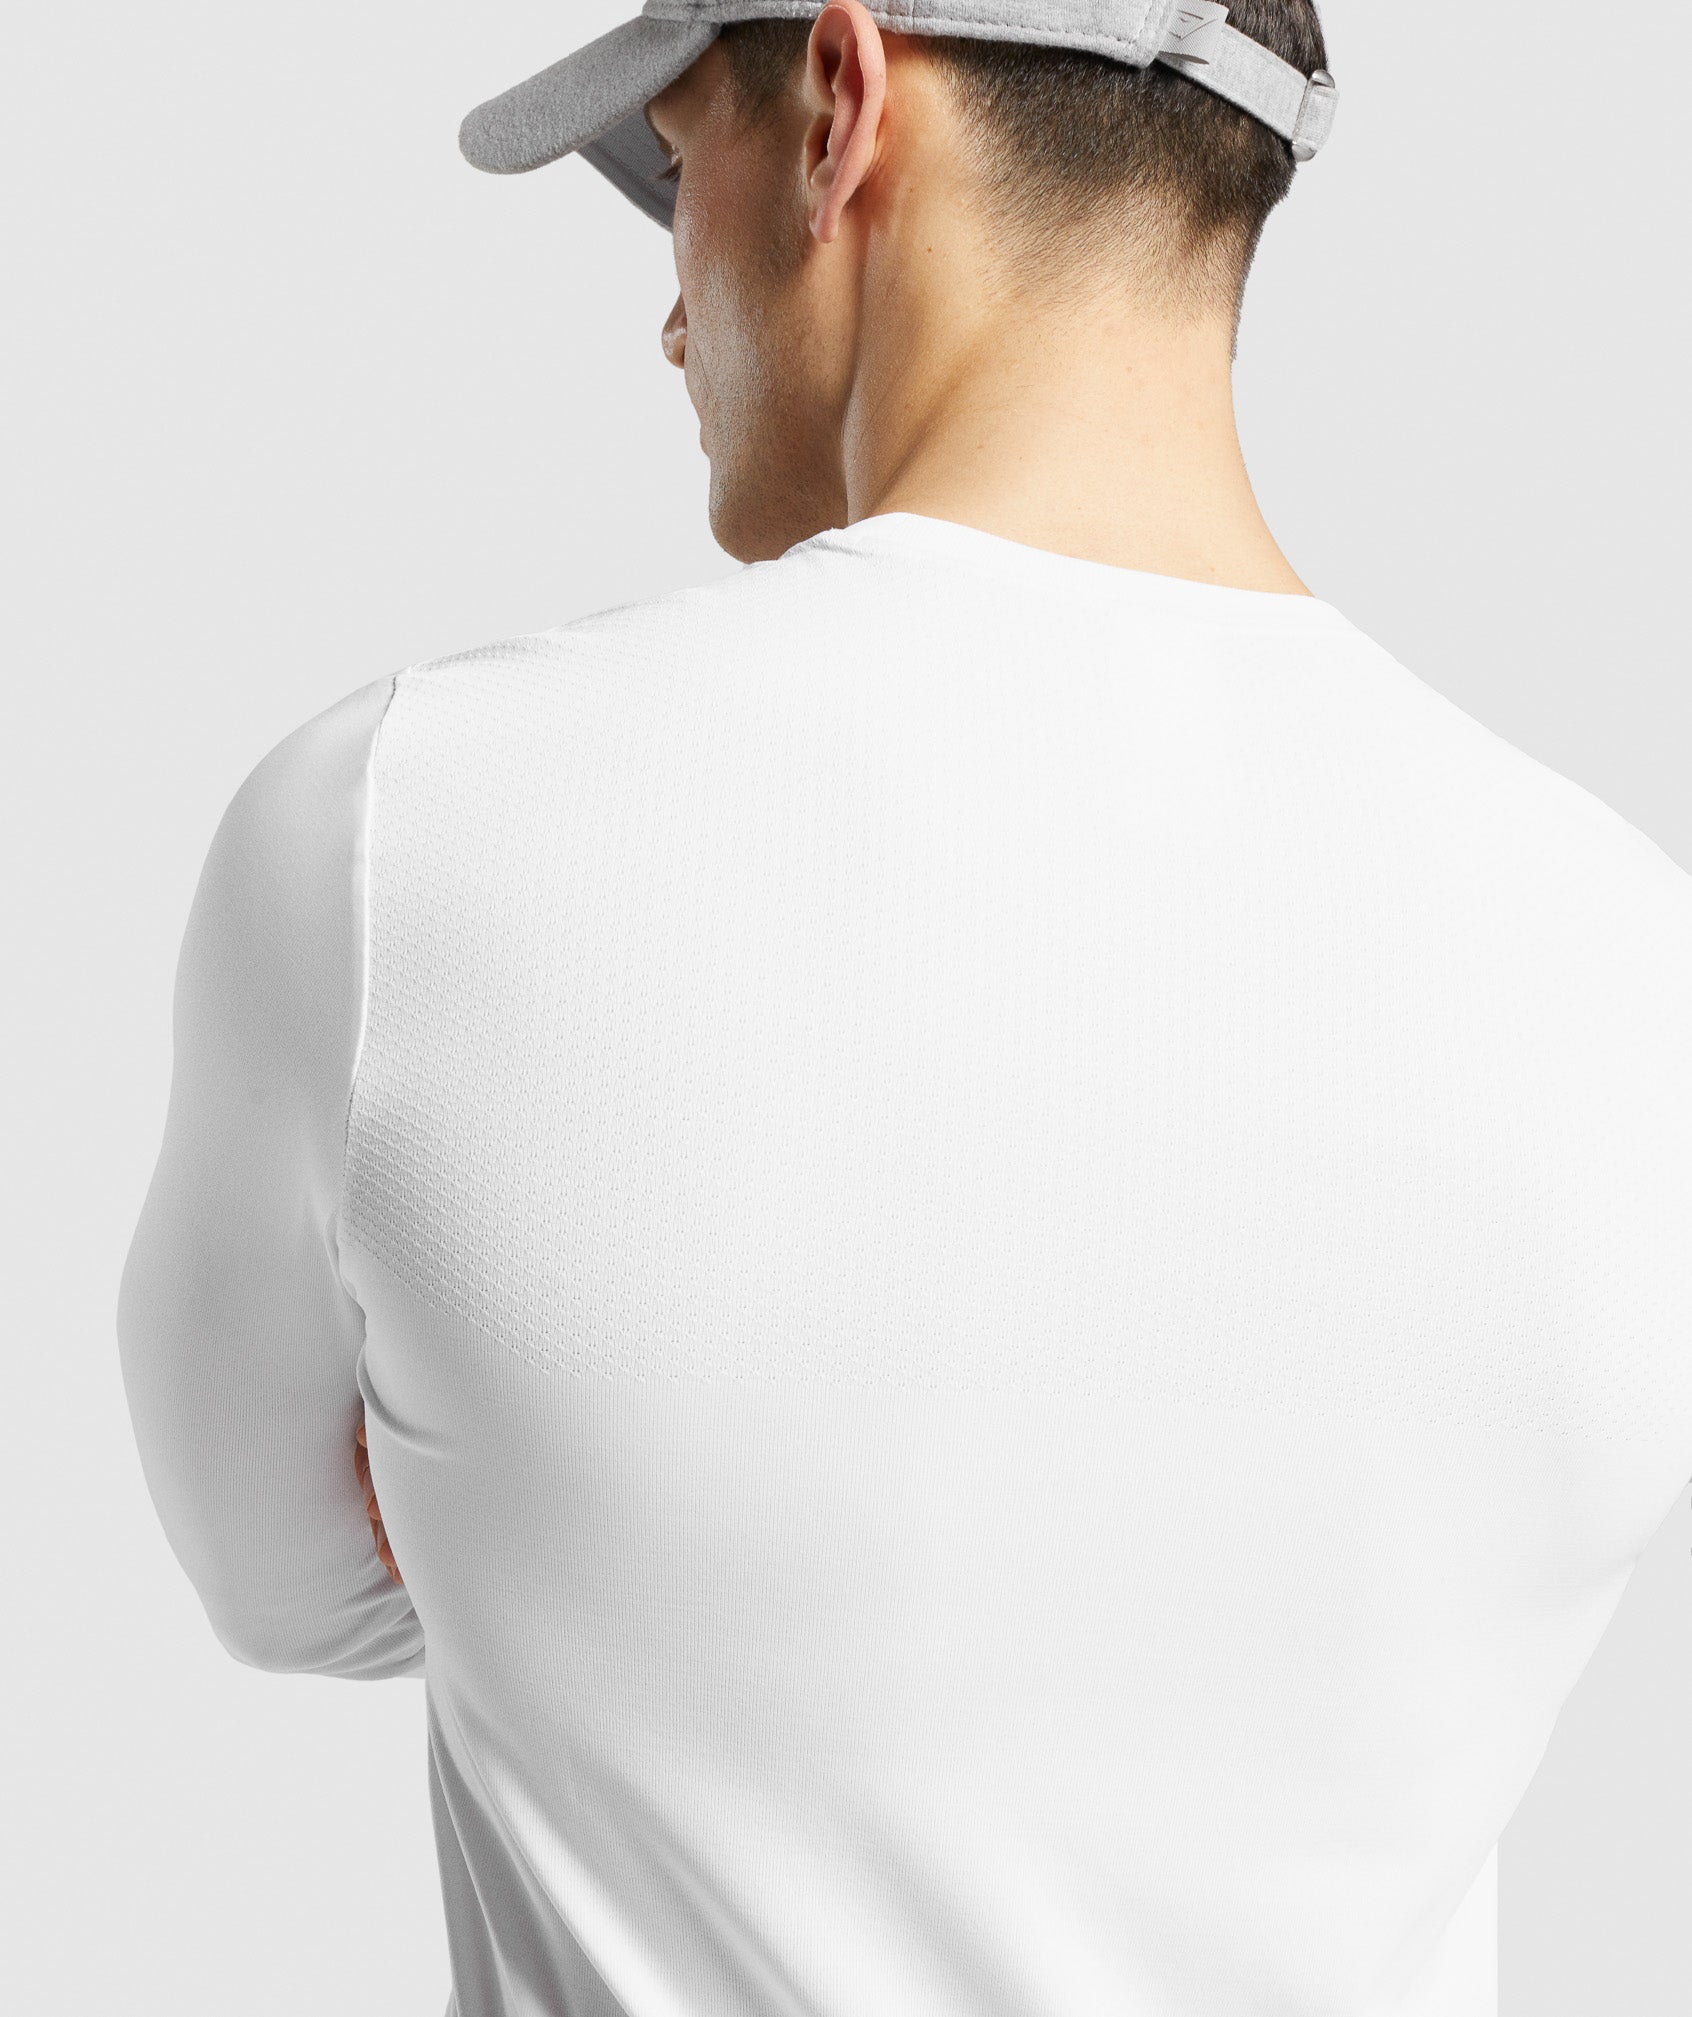 Vital Long Sleeve T-Shirt in White - view 6